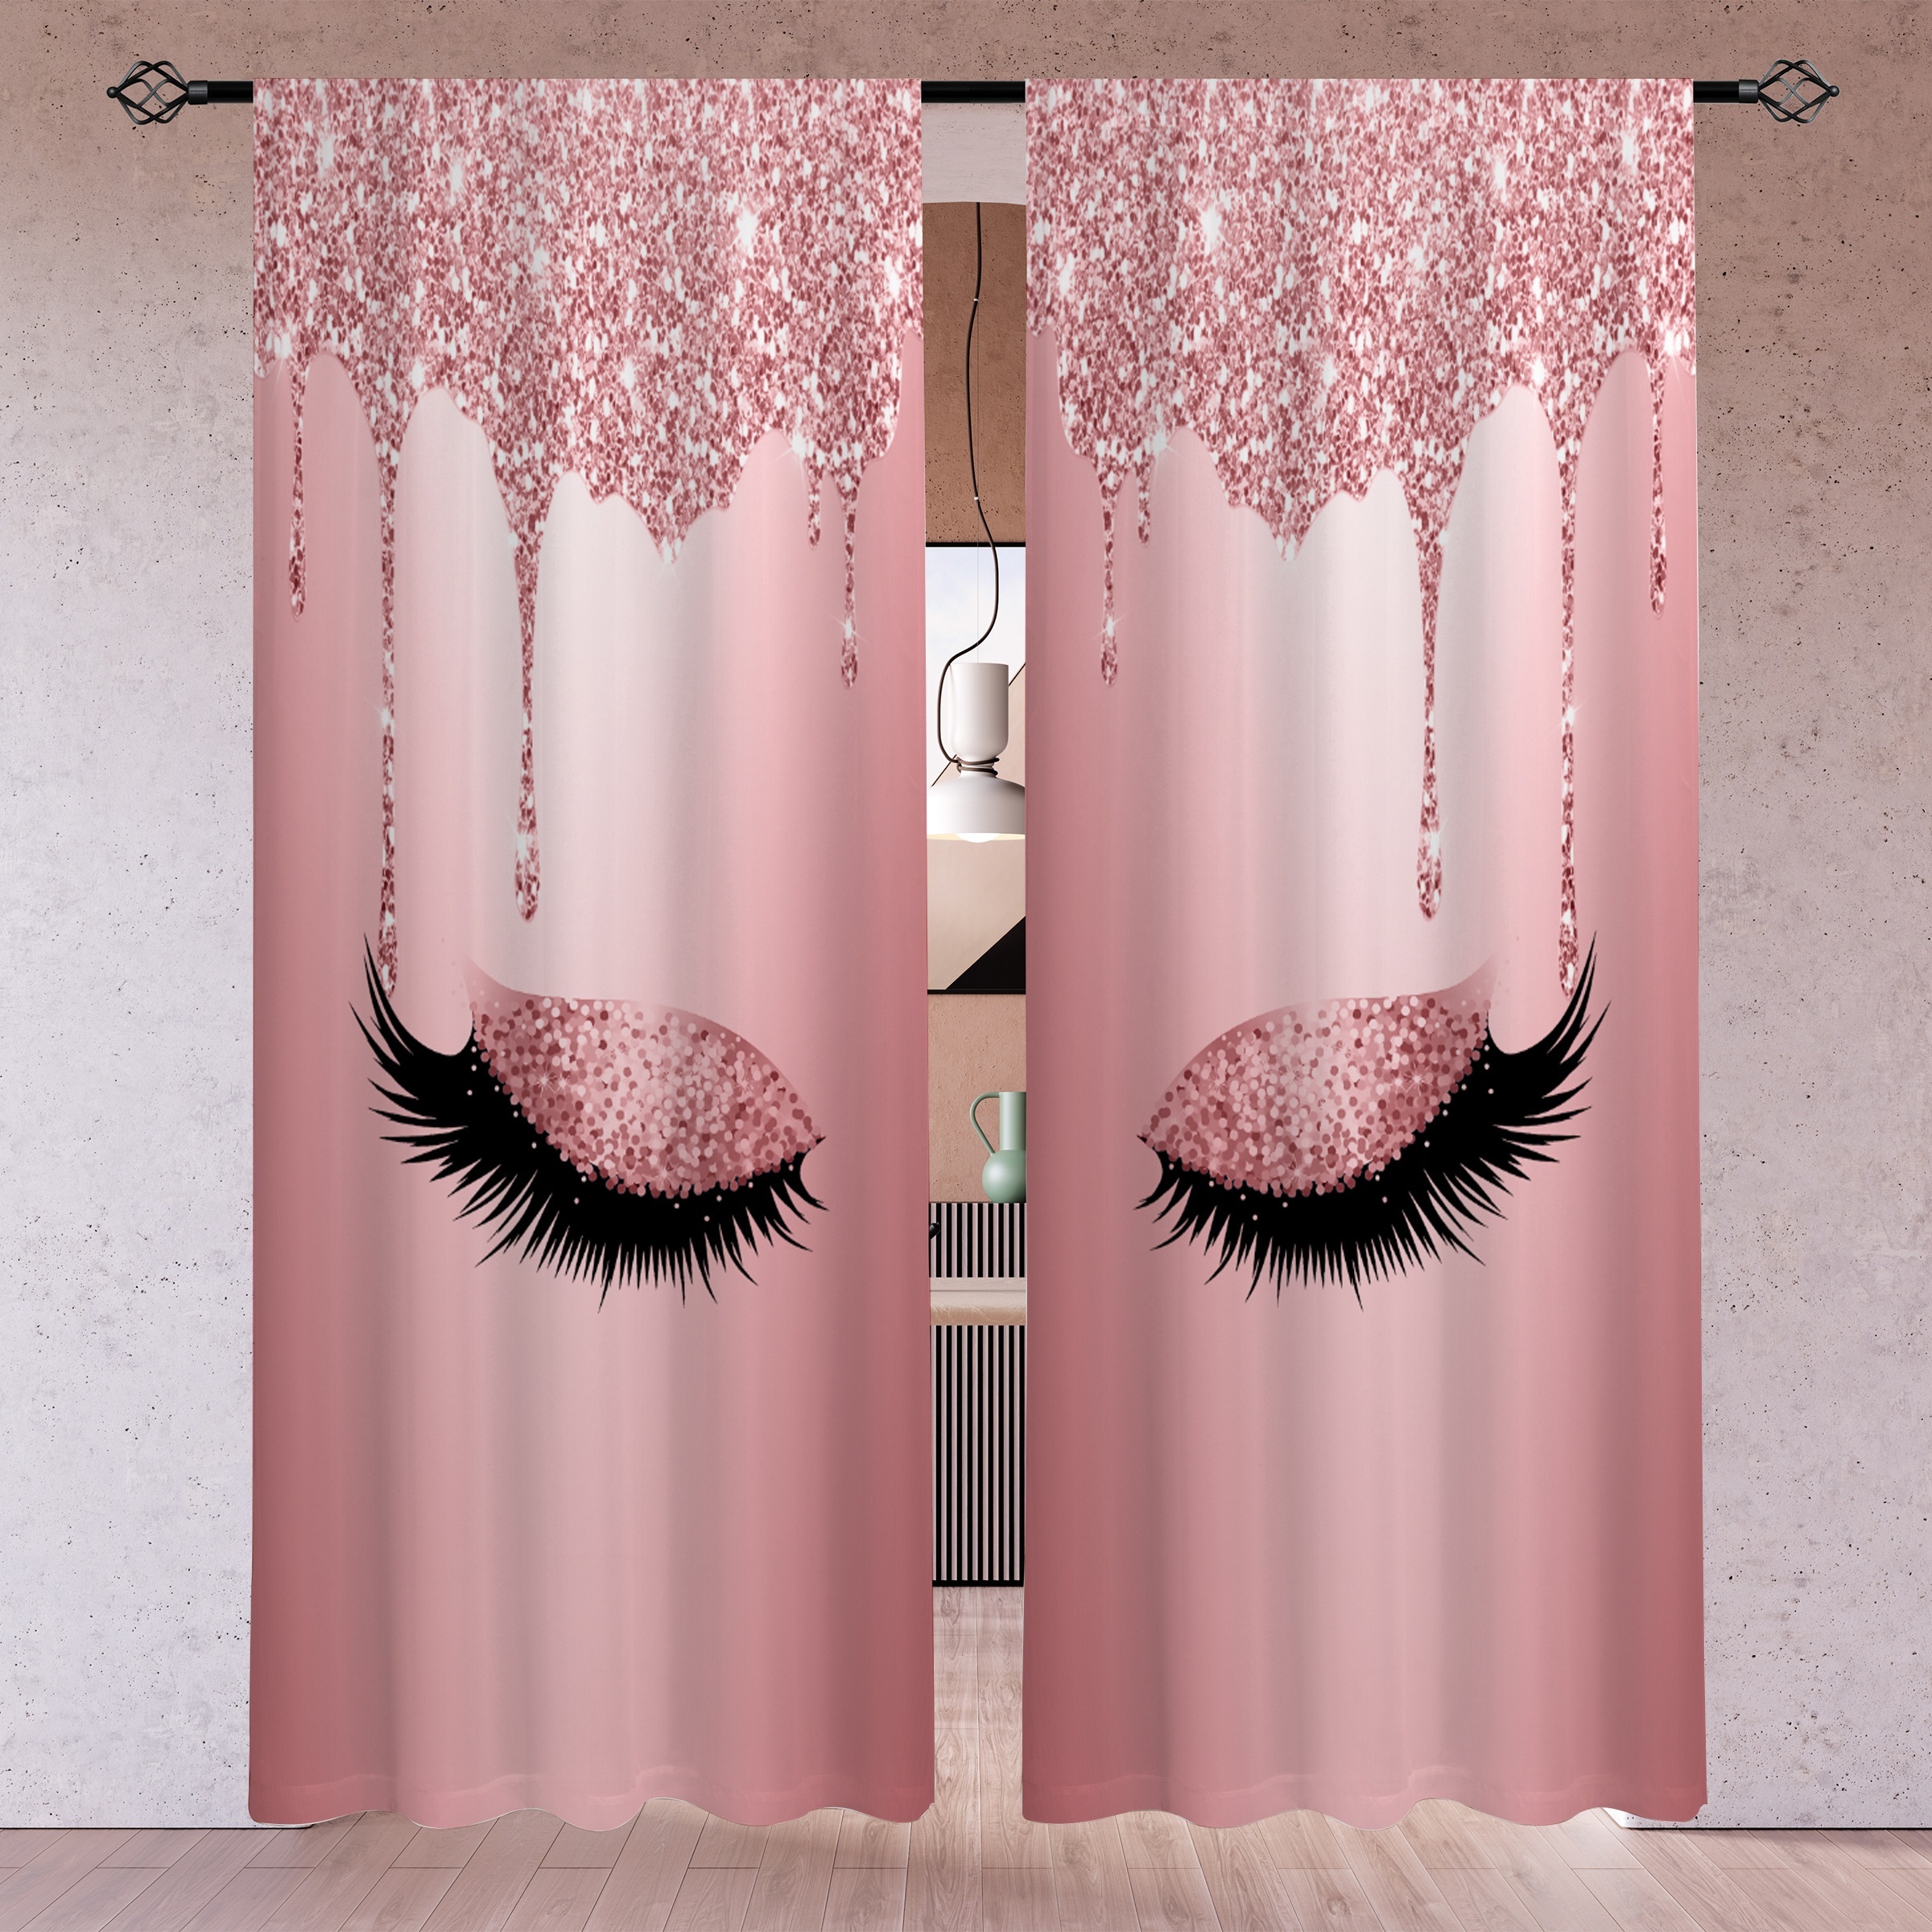 

2pcs, Eyelashes Gradient Color Printed Translucent Curtains, Multi-scene Polyester Rod Pocket Curtain For Living Room Game Room Bedroom Home Decor Party Supplies